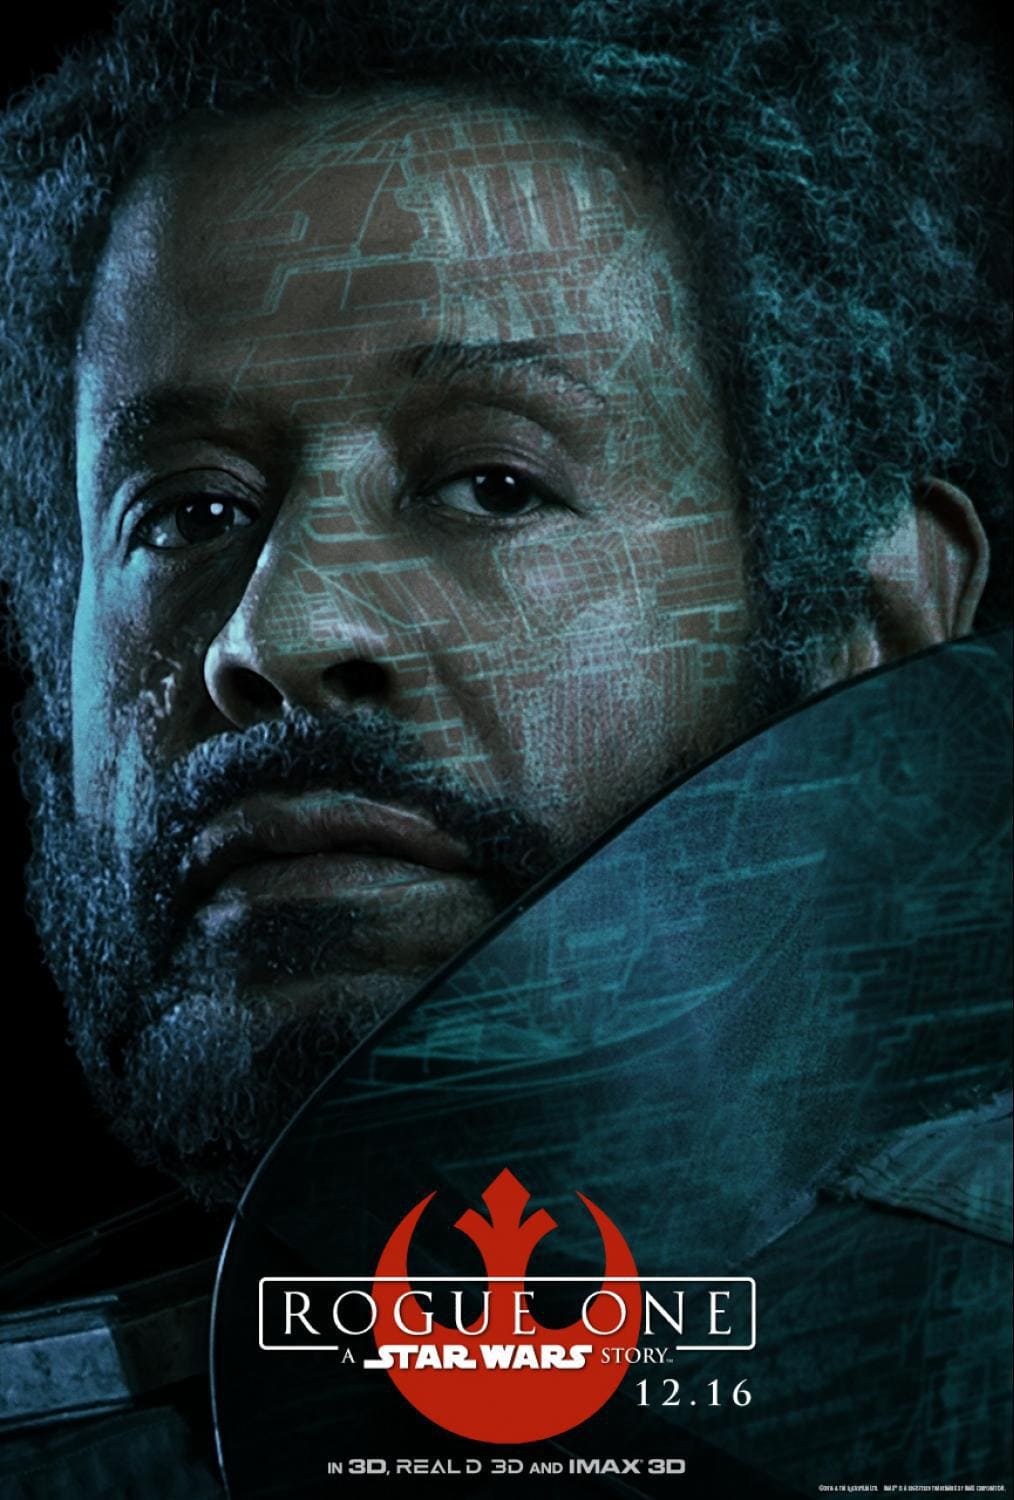 First Look - Rogue One: A Star Wars Story Character Posters Now Available